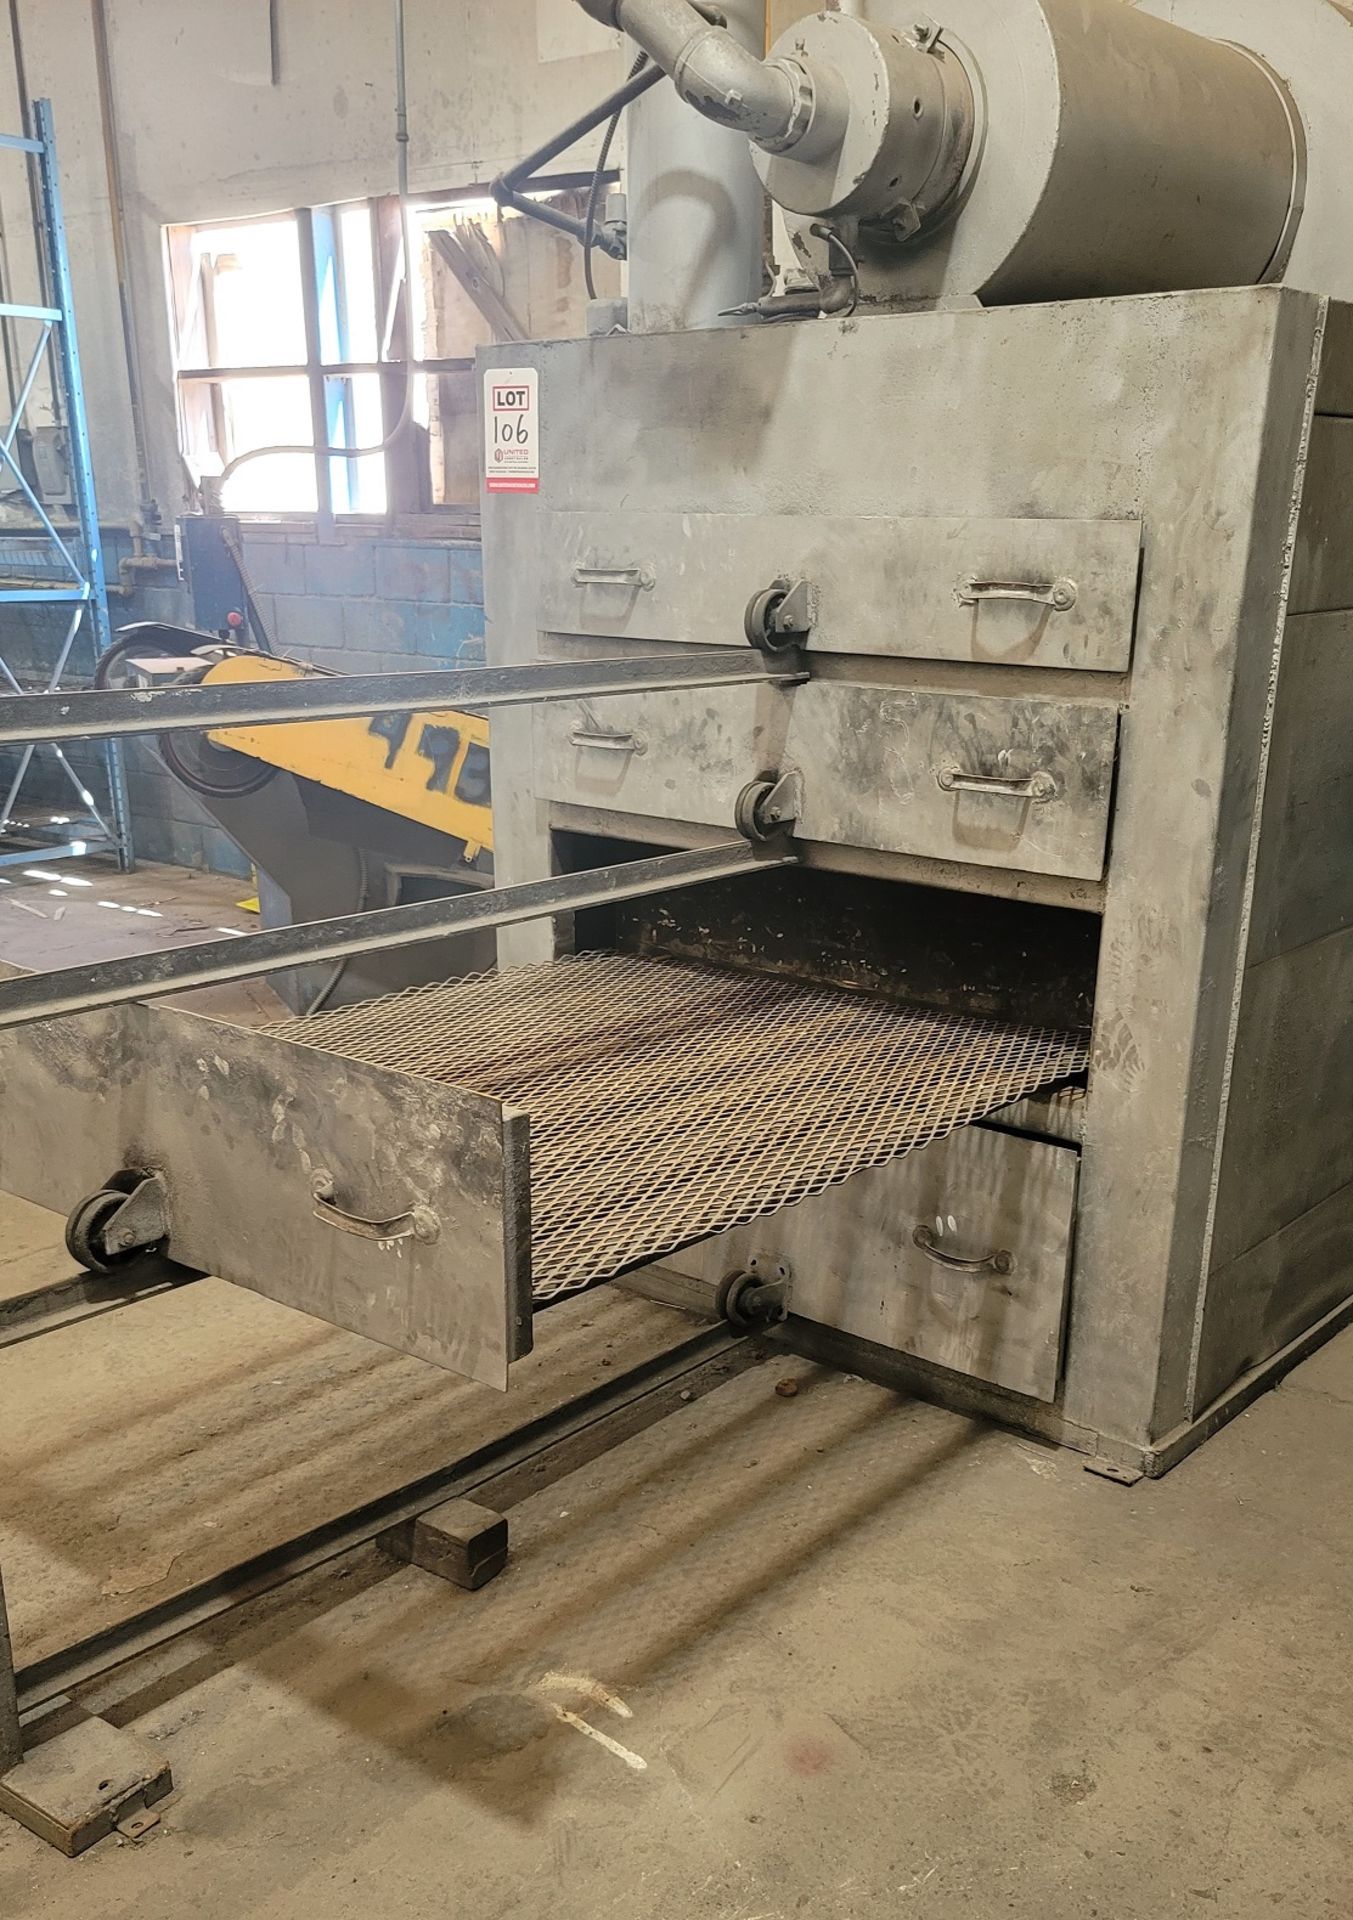 GAS BURNER FURNACE W/ DRAWERS FOR CORES (PLM 150) - Image 2 of 3